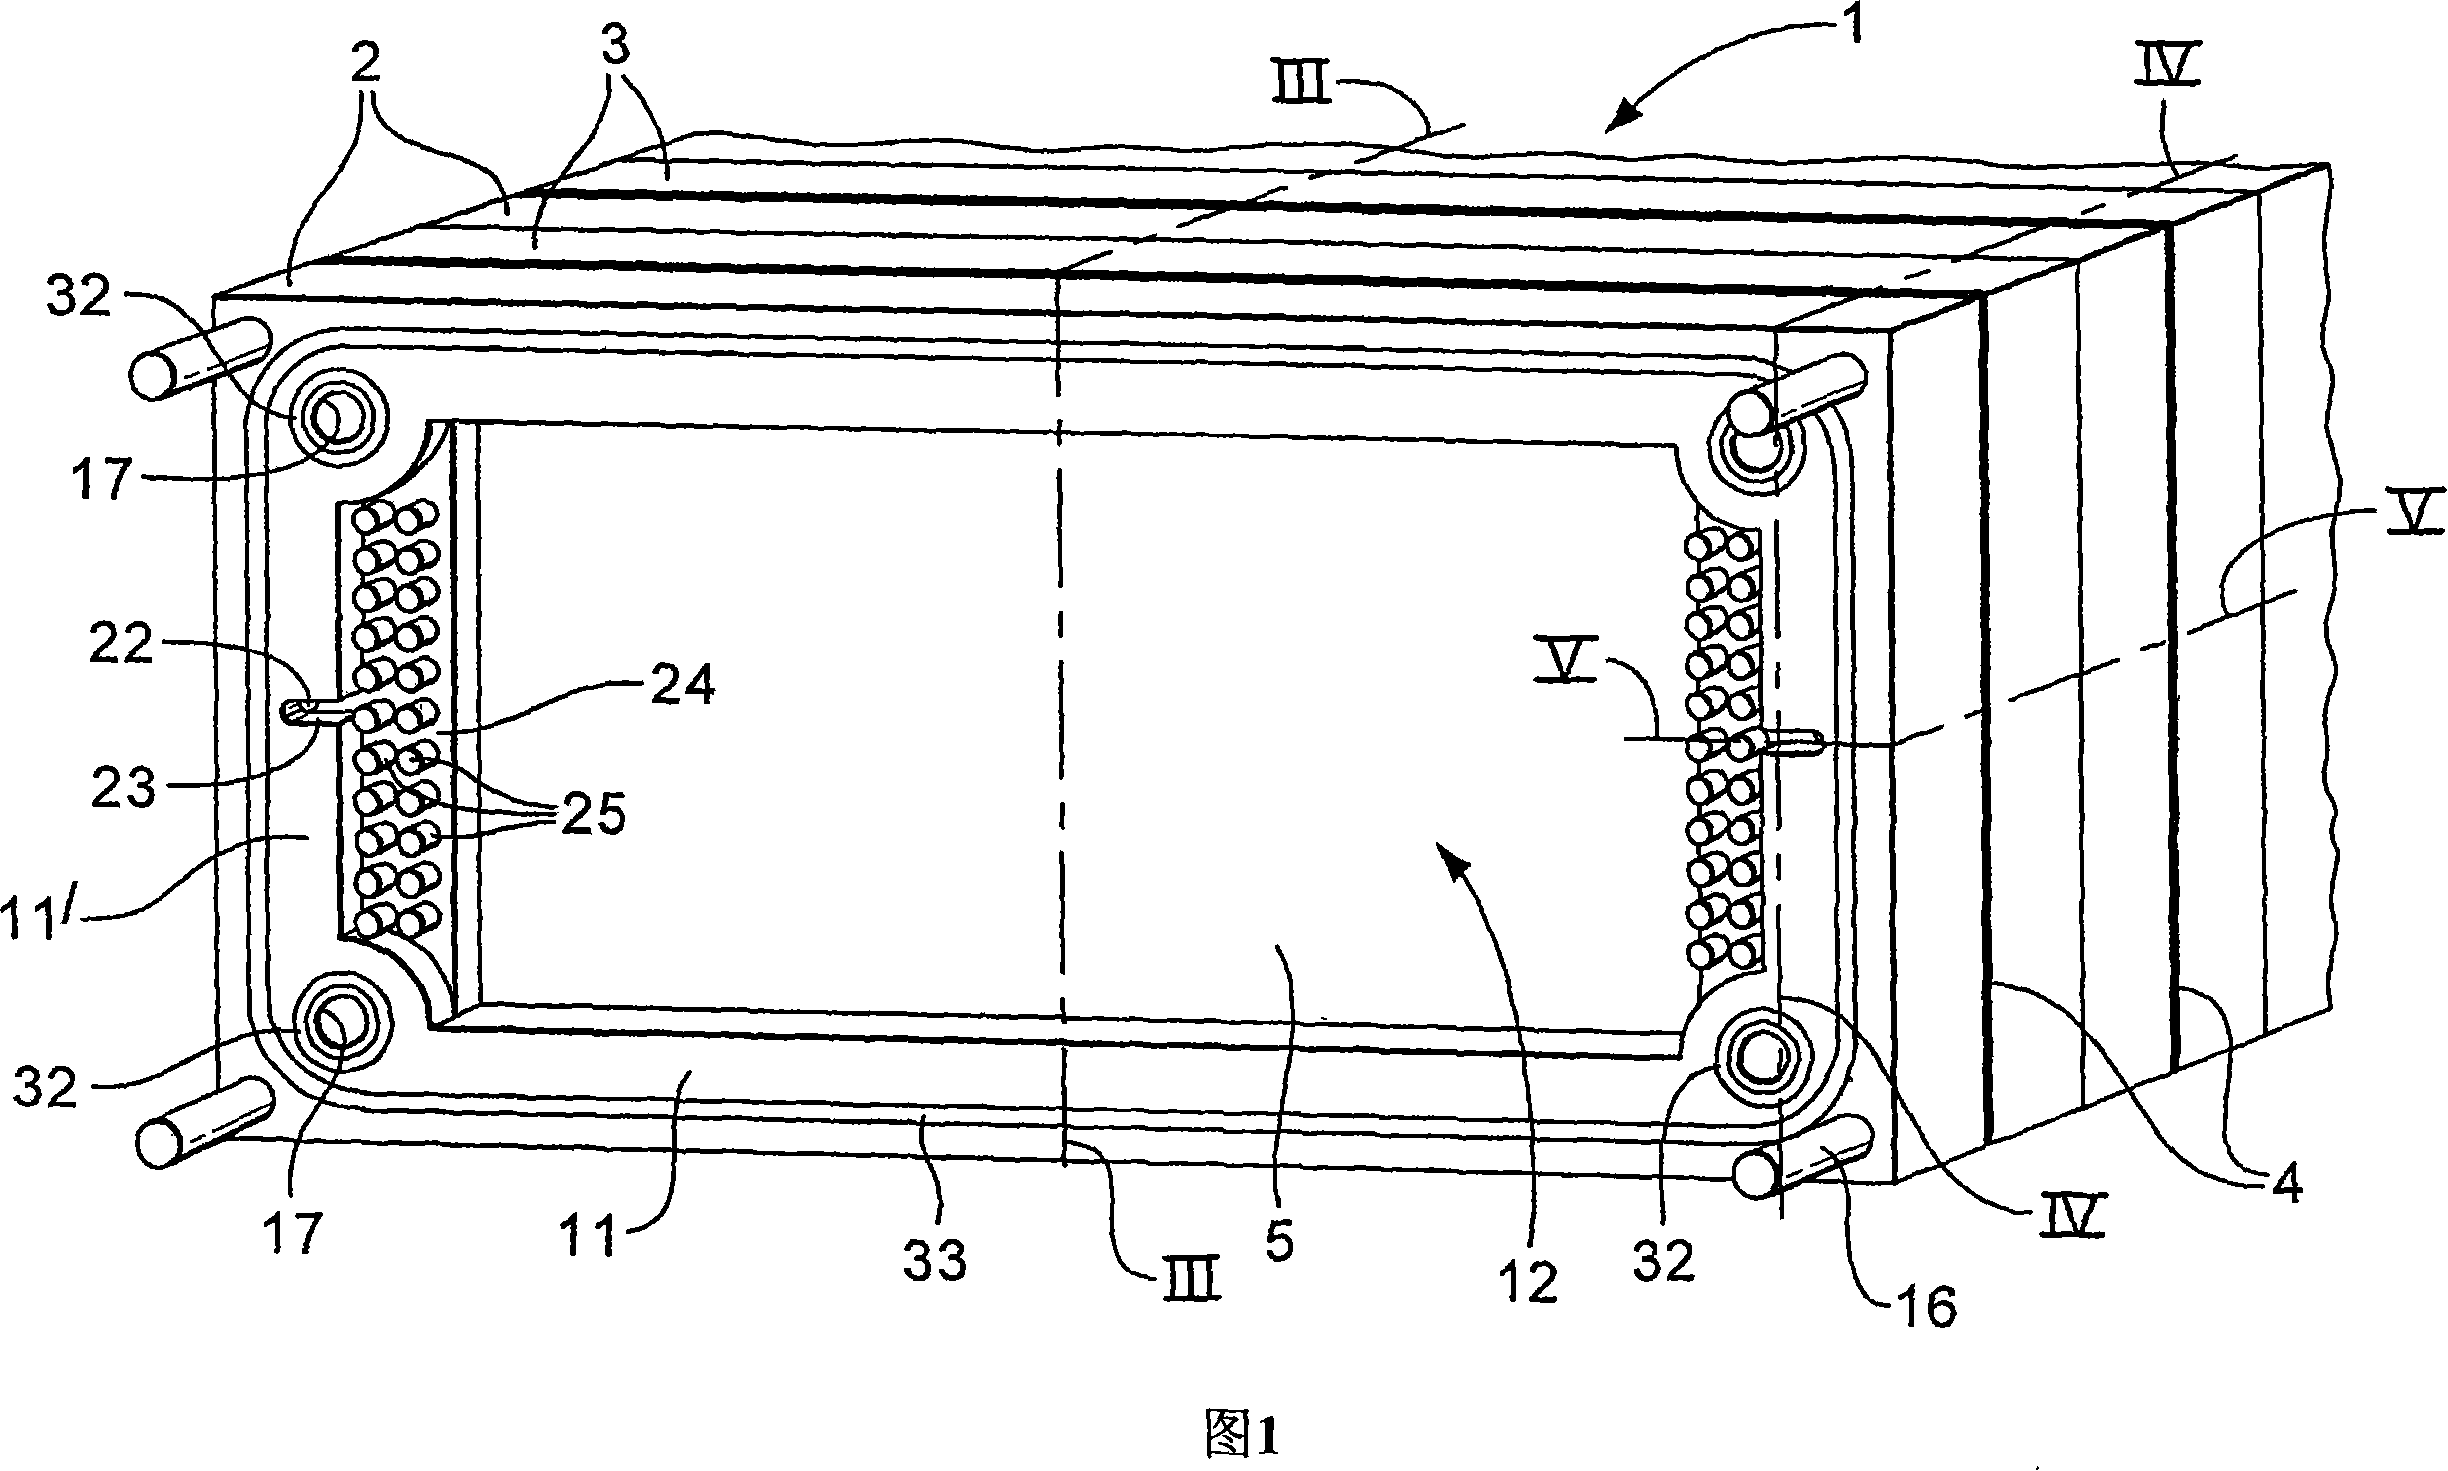 Electrochemical cell stack with frame elements